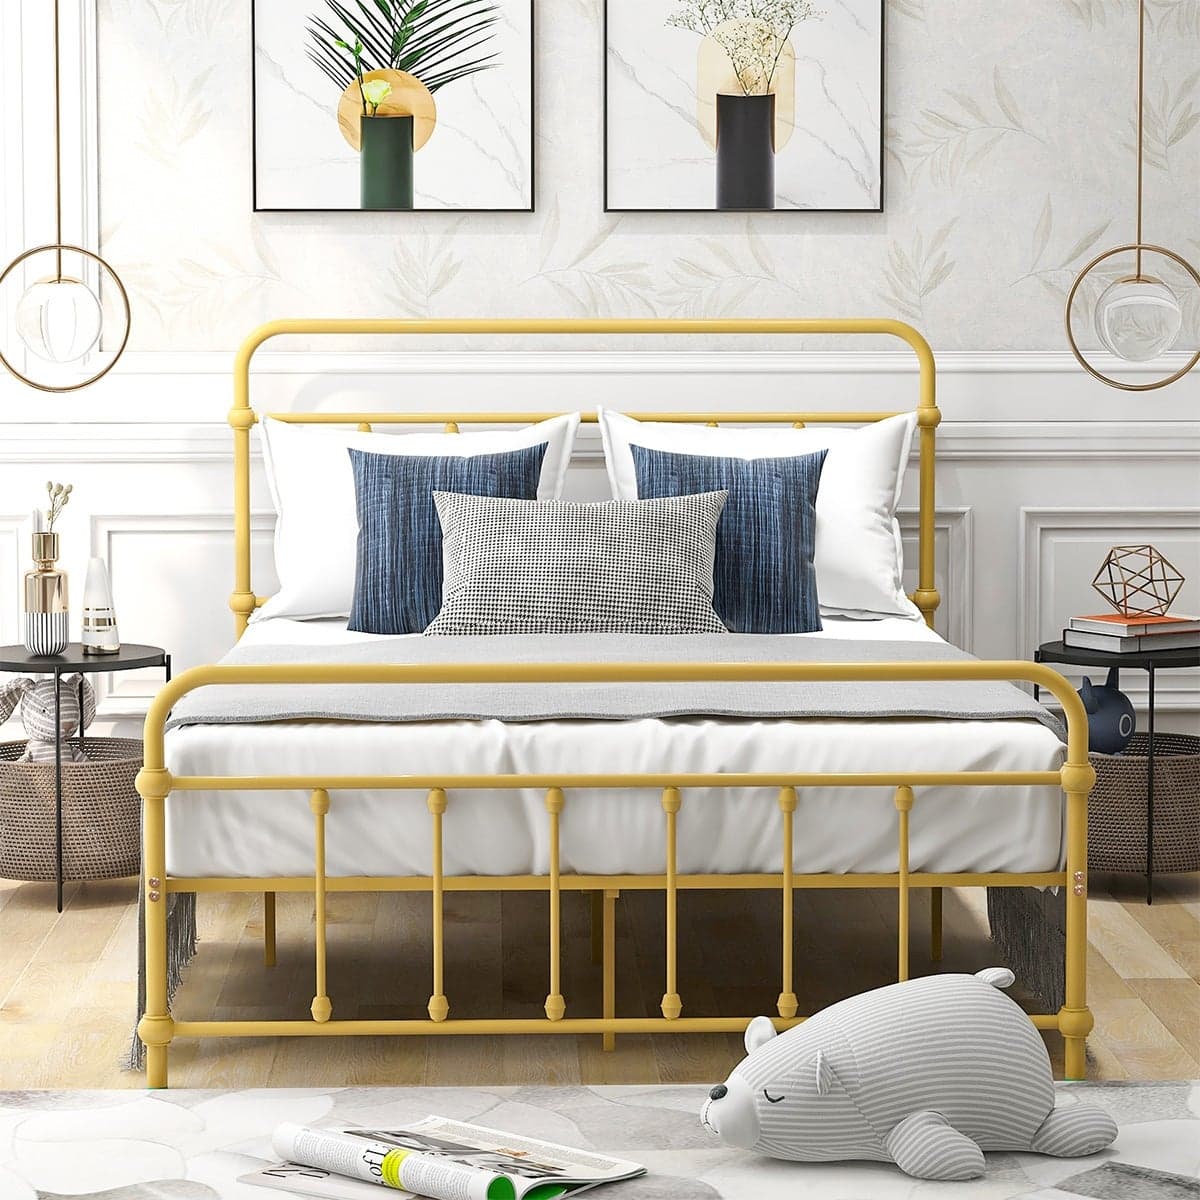 Go for a Sleek Bed Frame with Headboard